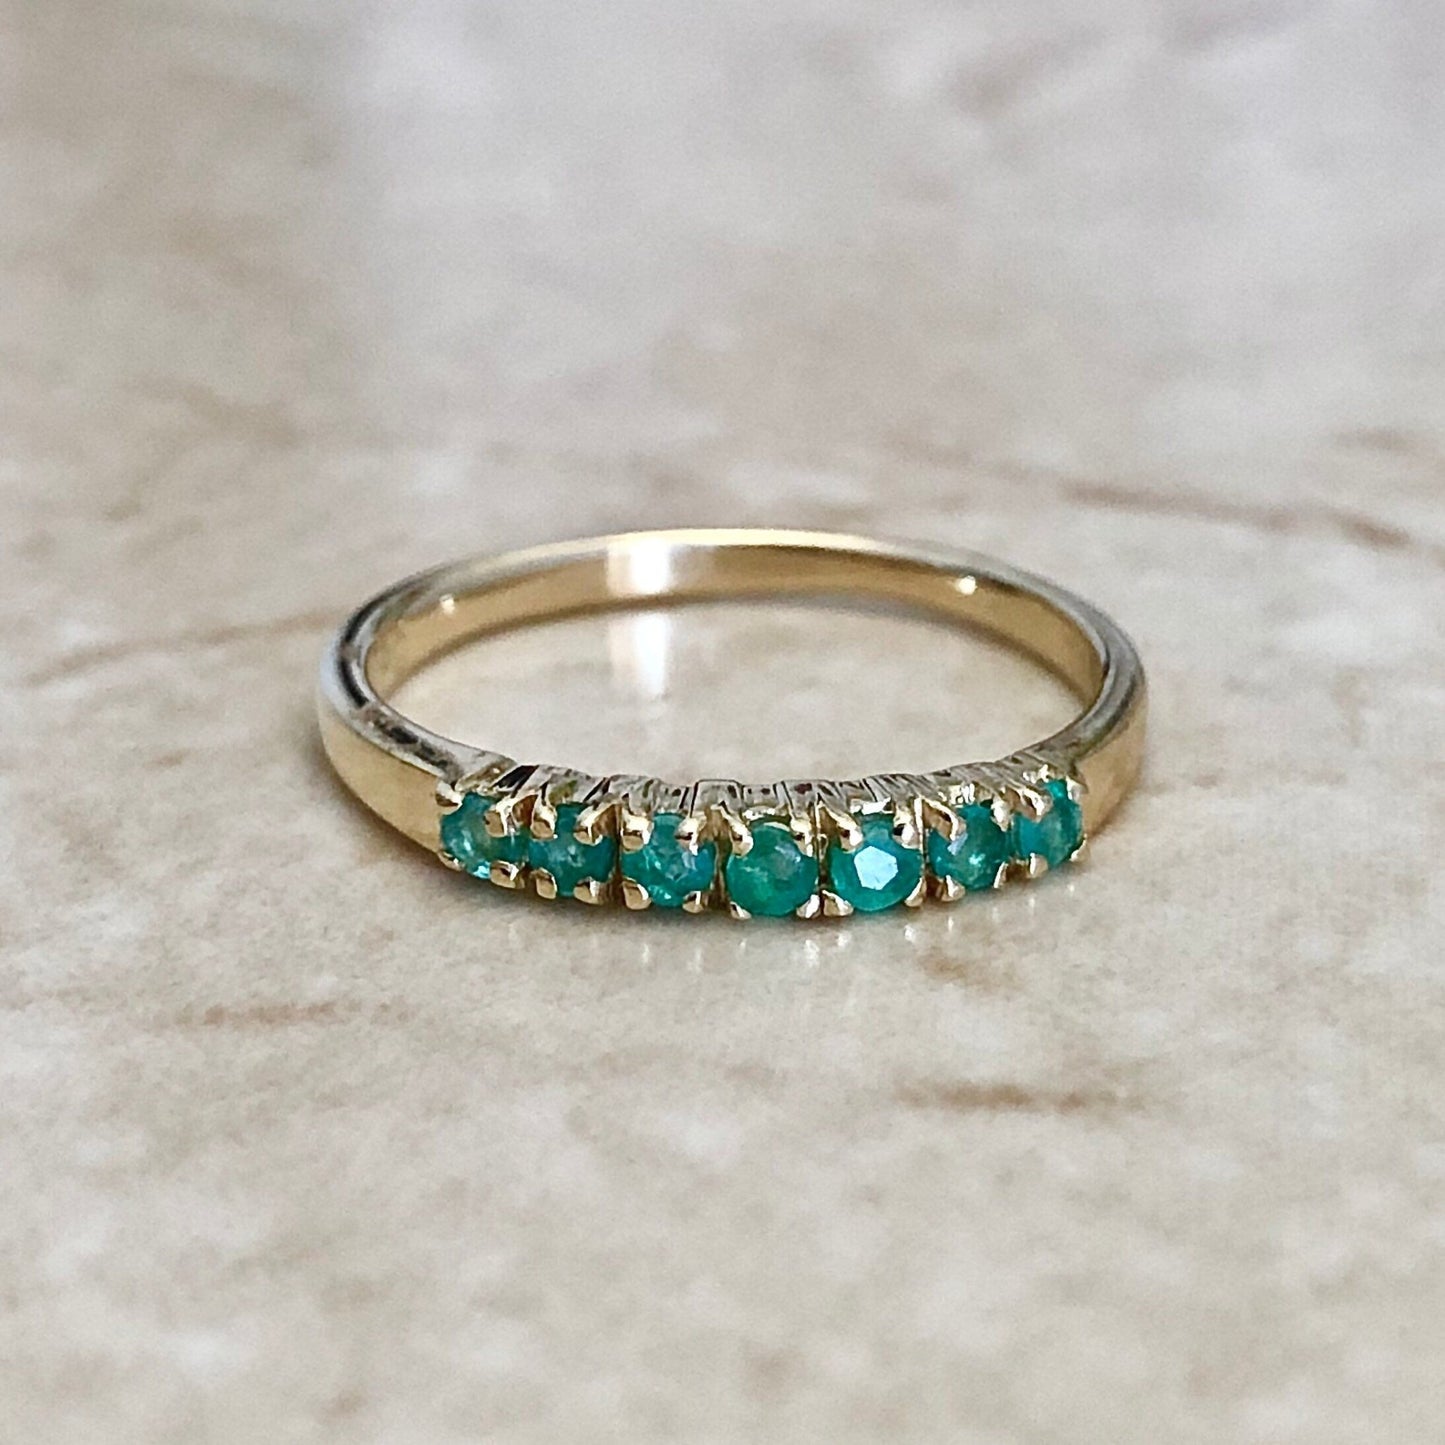 Vintage 14K Natural Emerald Band - Yellow Gold - Genuine Gemstone Ring - Size 6 US - Birthday Gift - May Birthstone - Promise Ring